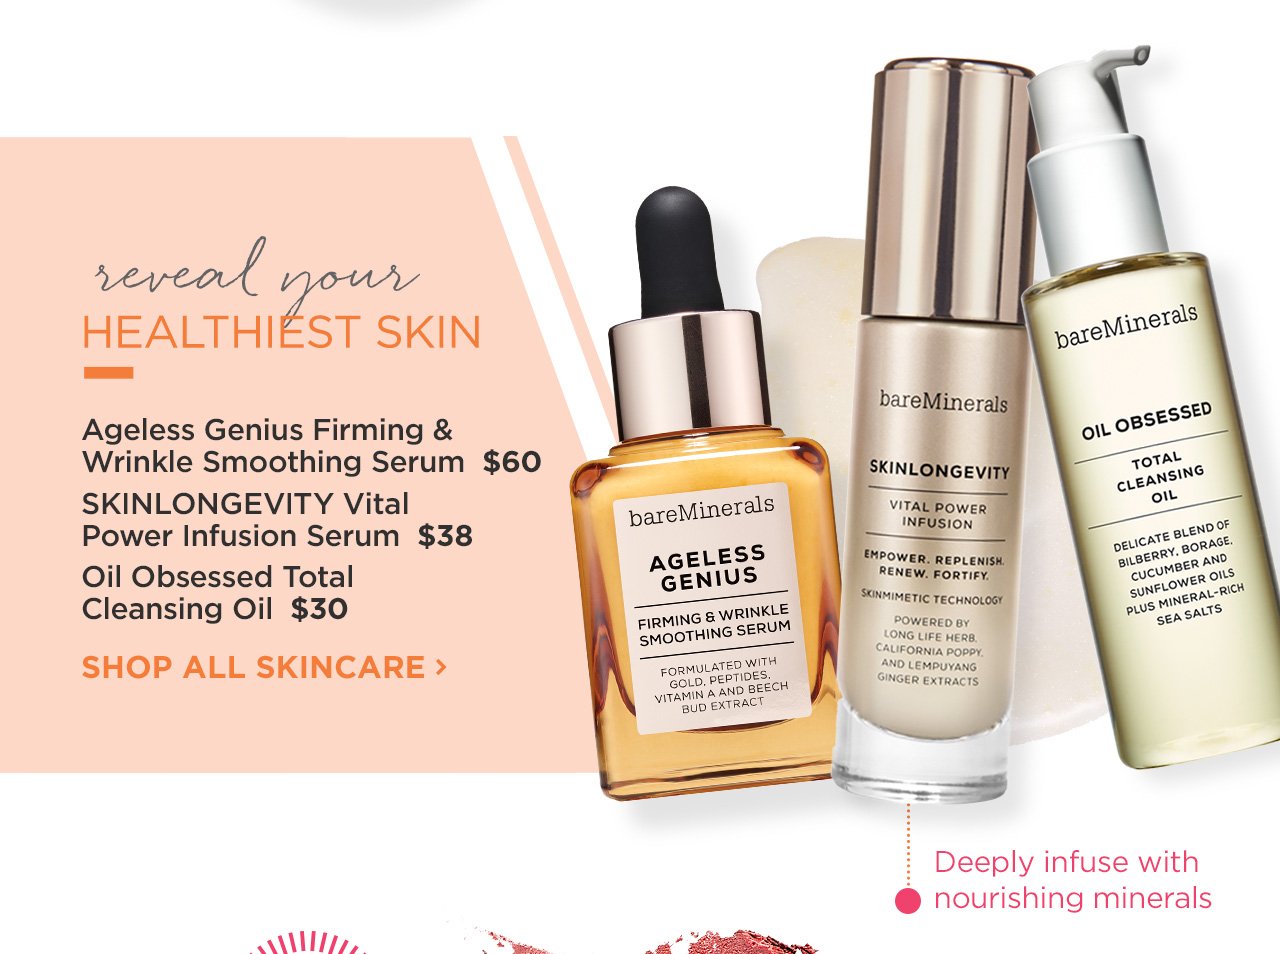 SKINLONGEVITY Vital Power Infusion Serum $38 | Oil Obsessed Total Cleansing Oil $30 | Shop Now